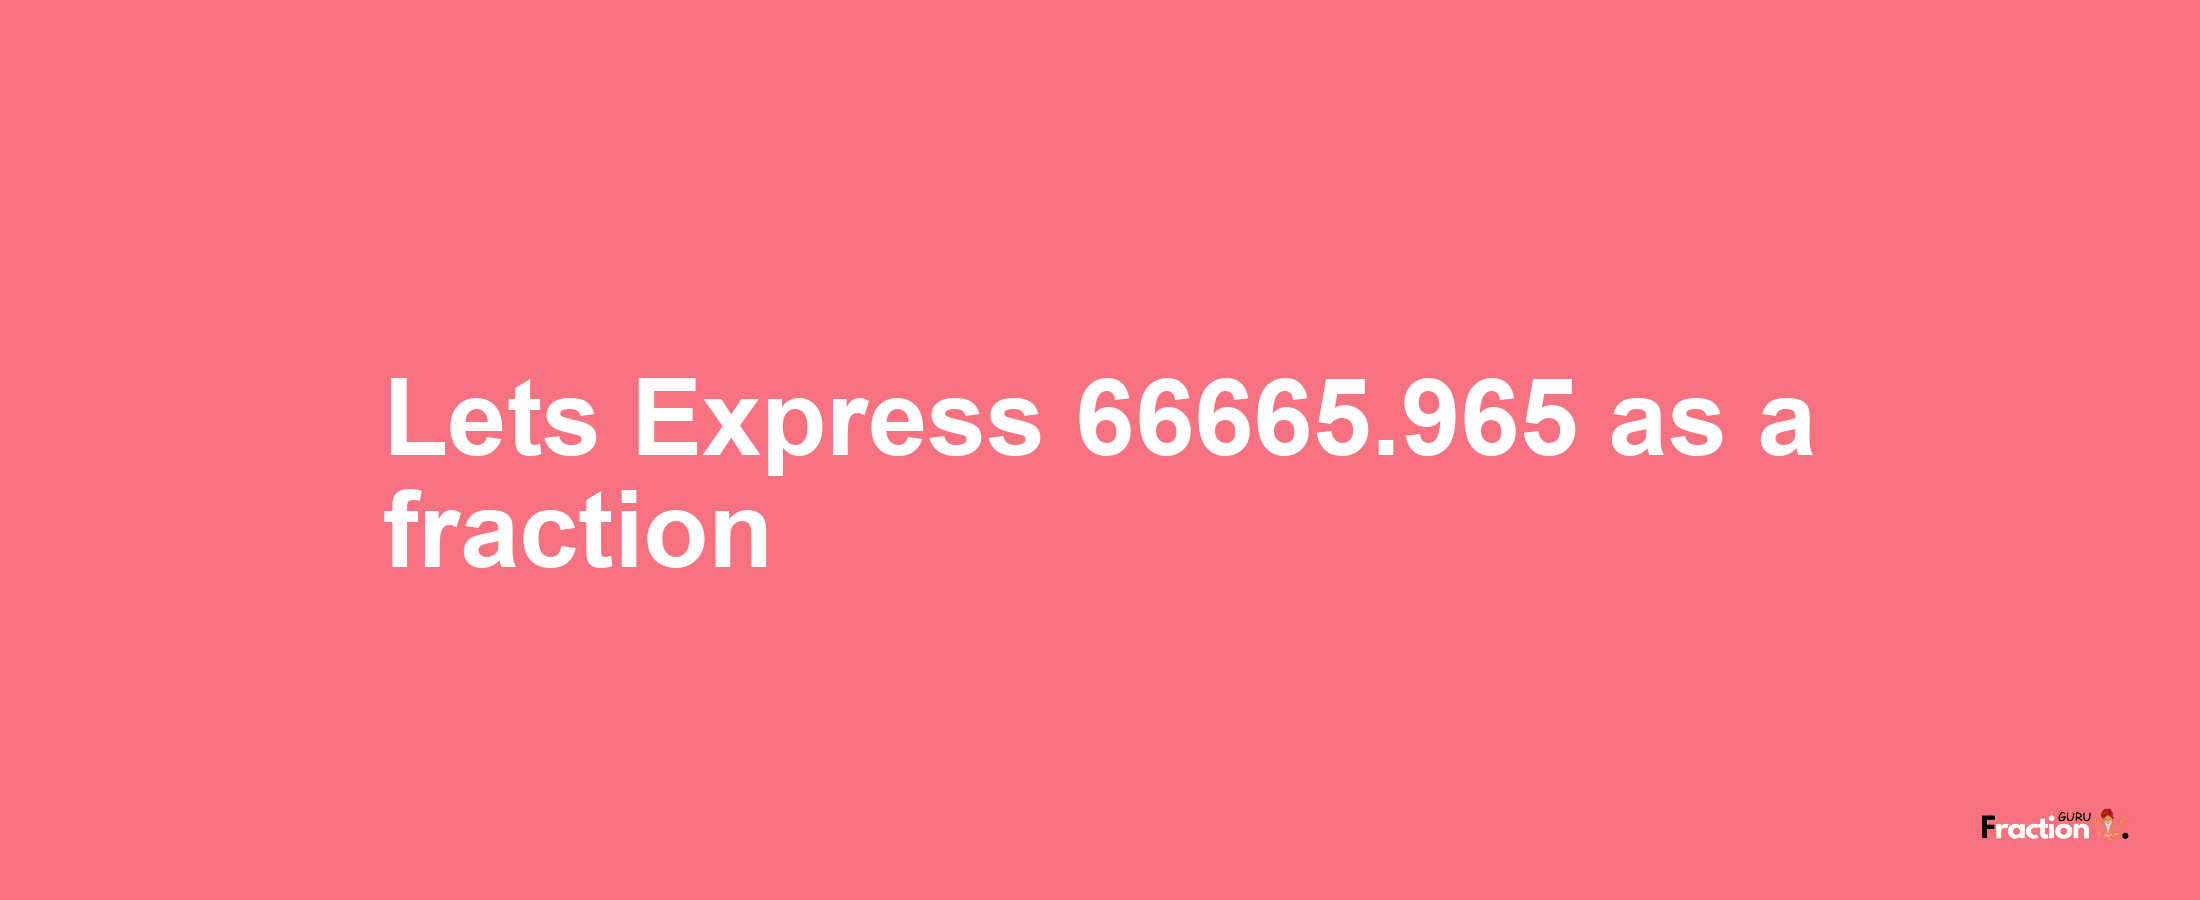 Lets Express 66665.965 as afraction